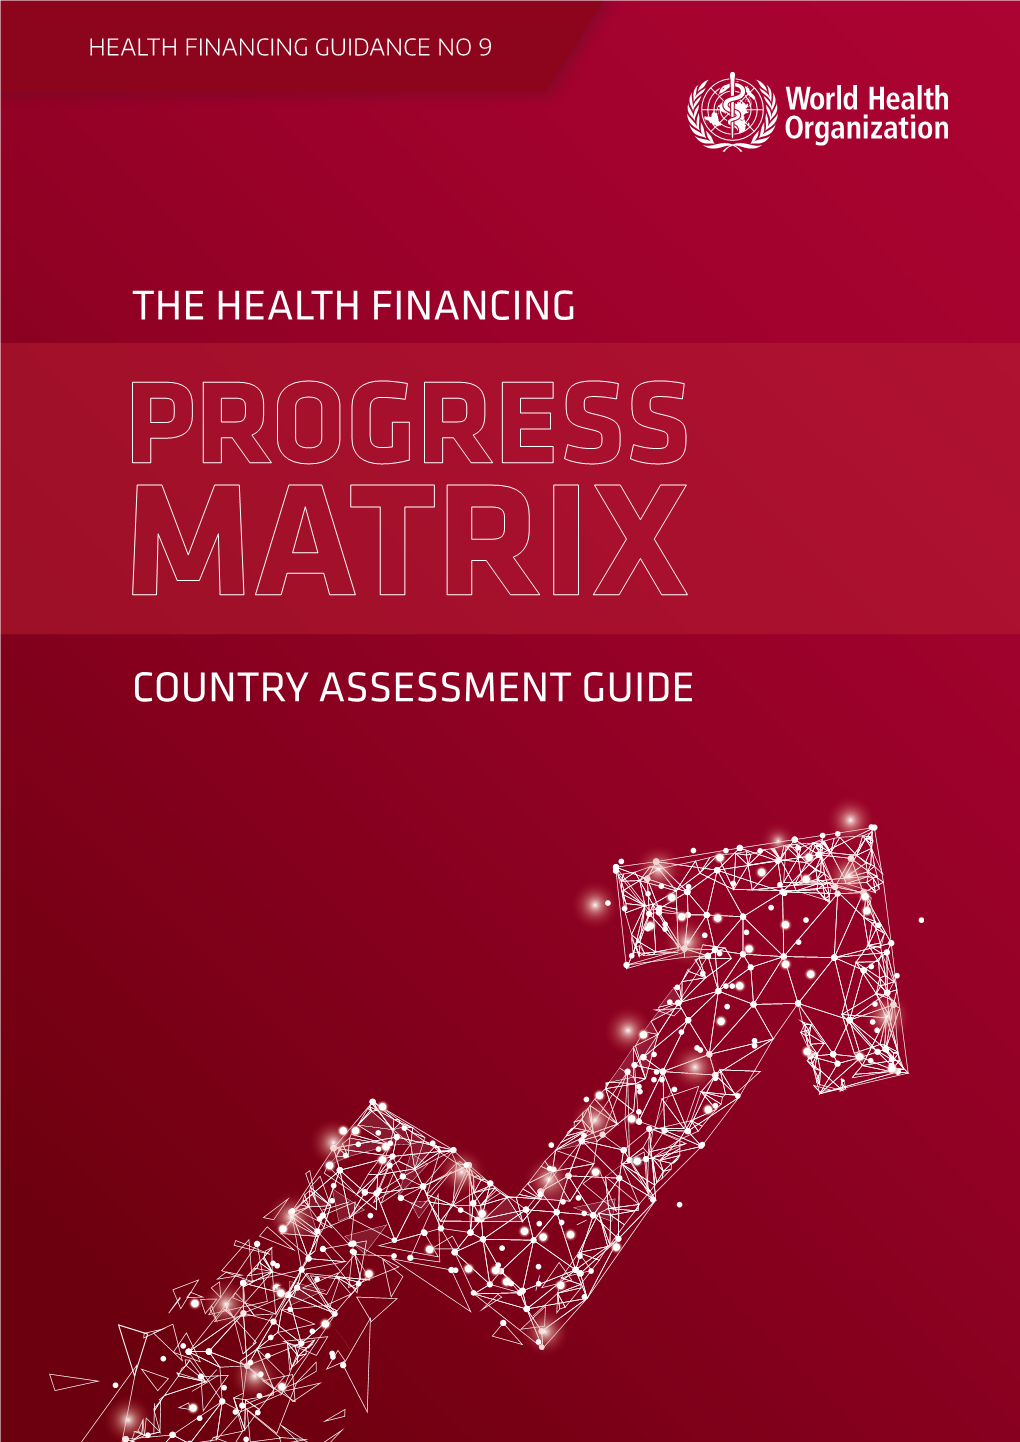 The Health Financing Country Assessment Guide